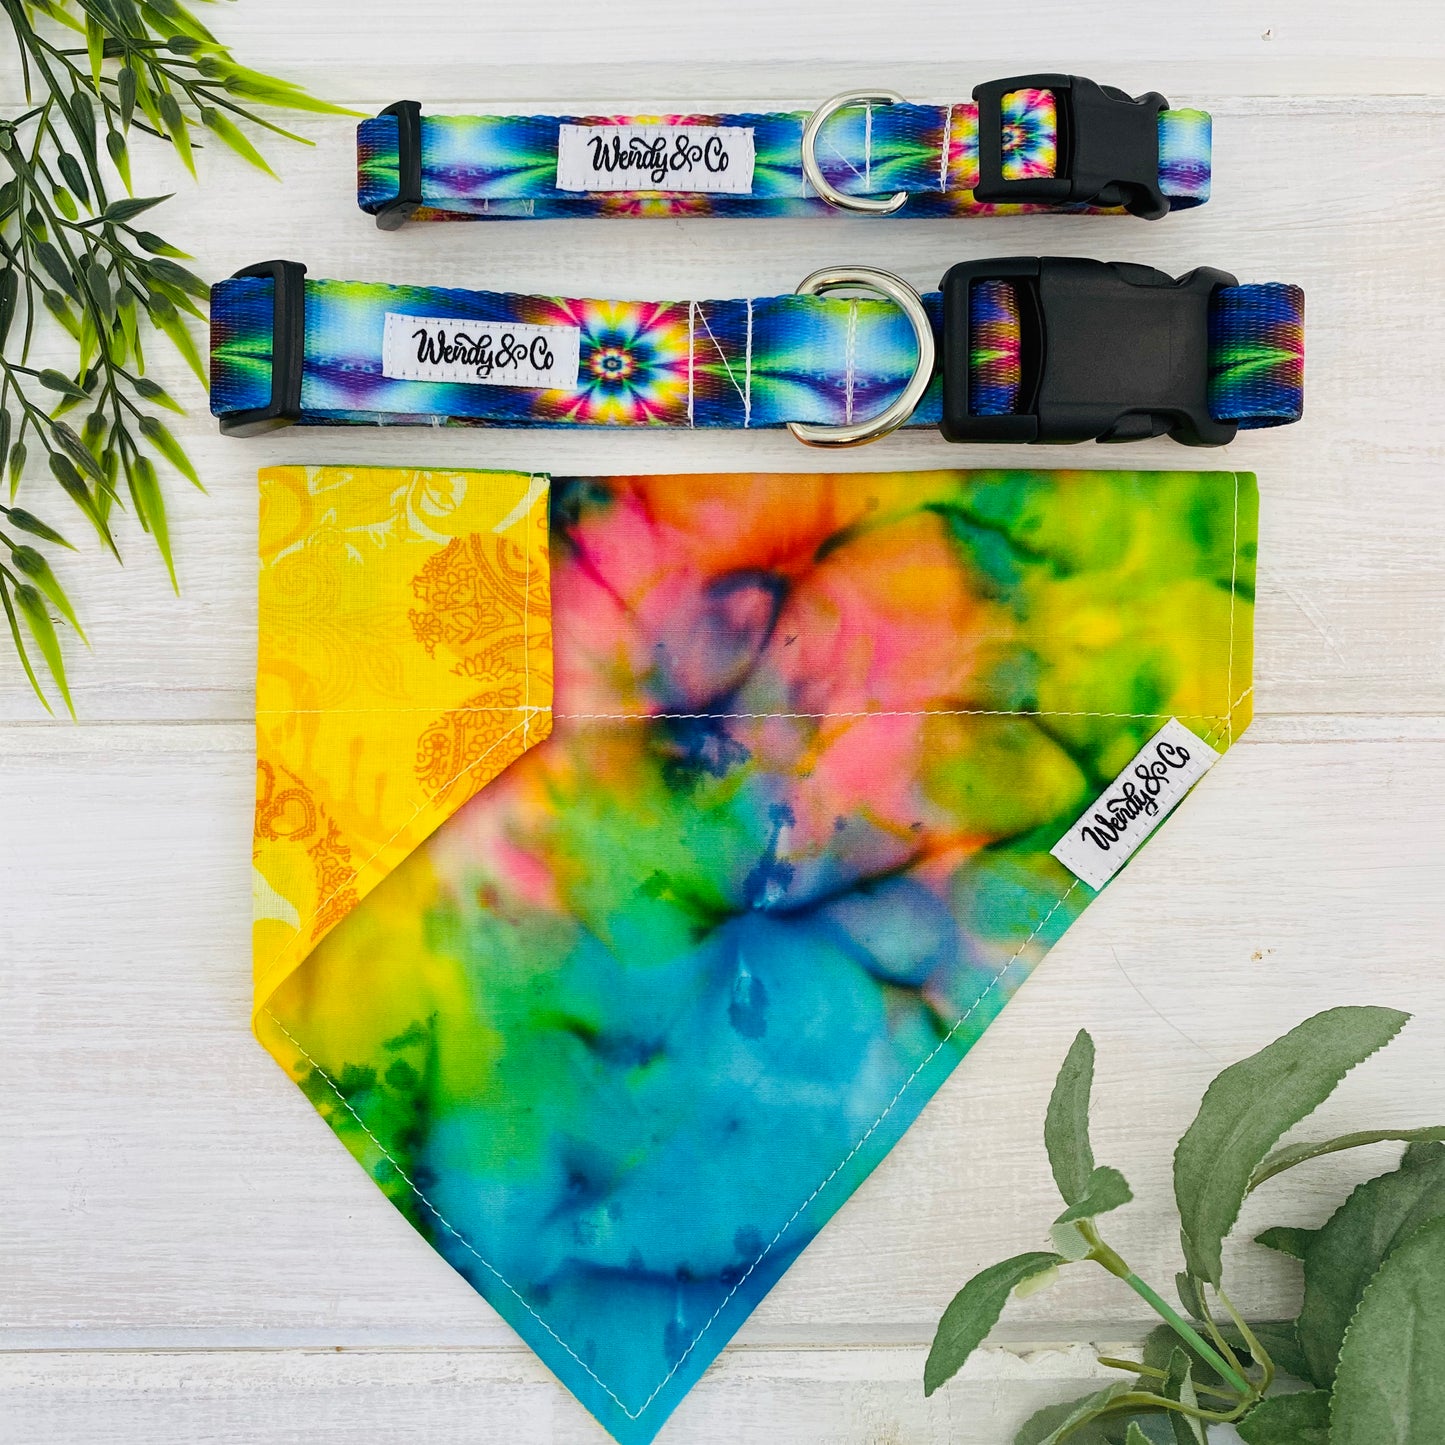 Vivid tie-die collar and bandana with groovy rainbow colors in concentrations of blue, yellow, green and pink.